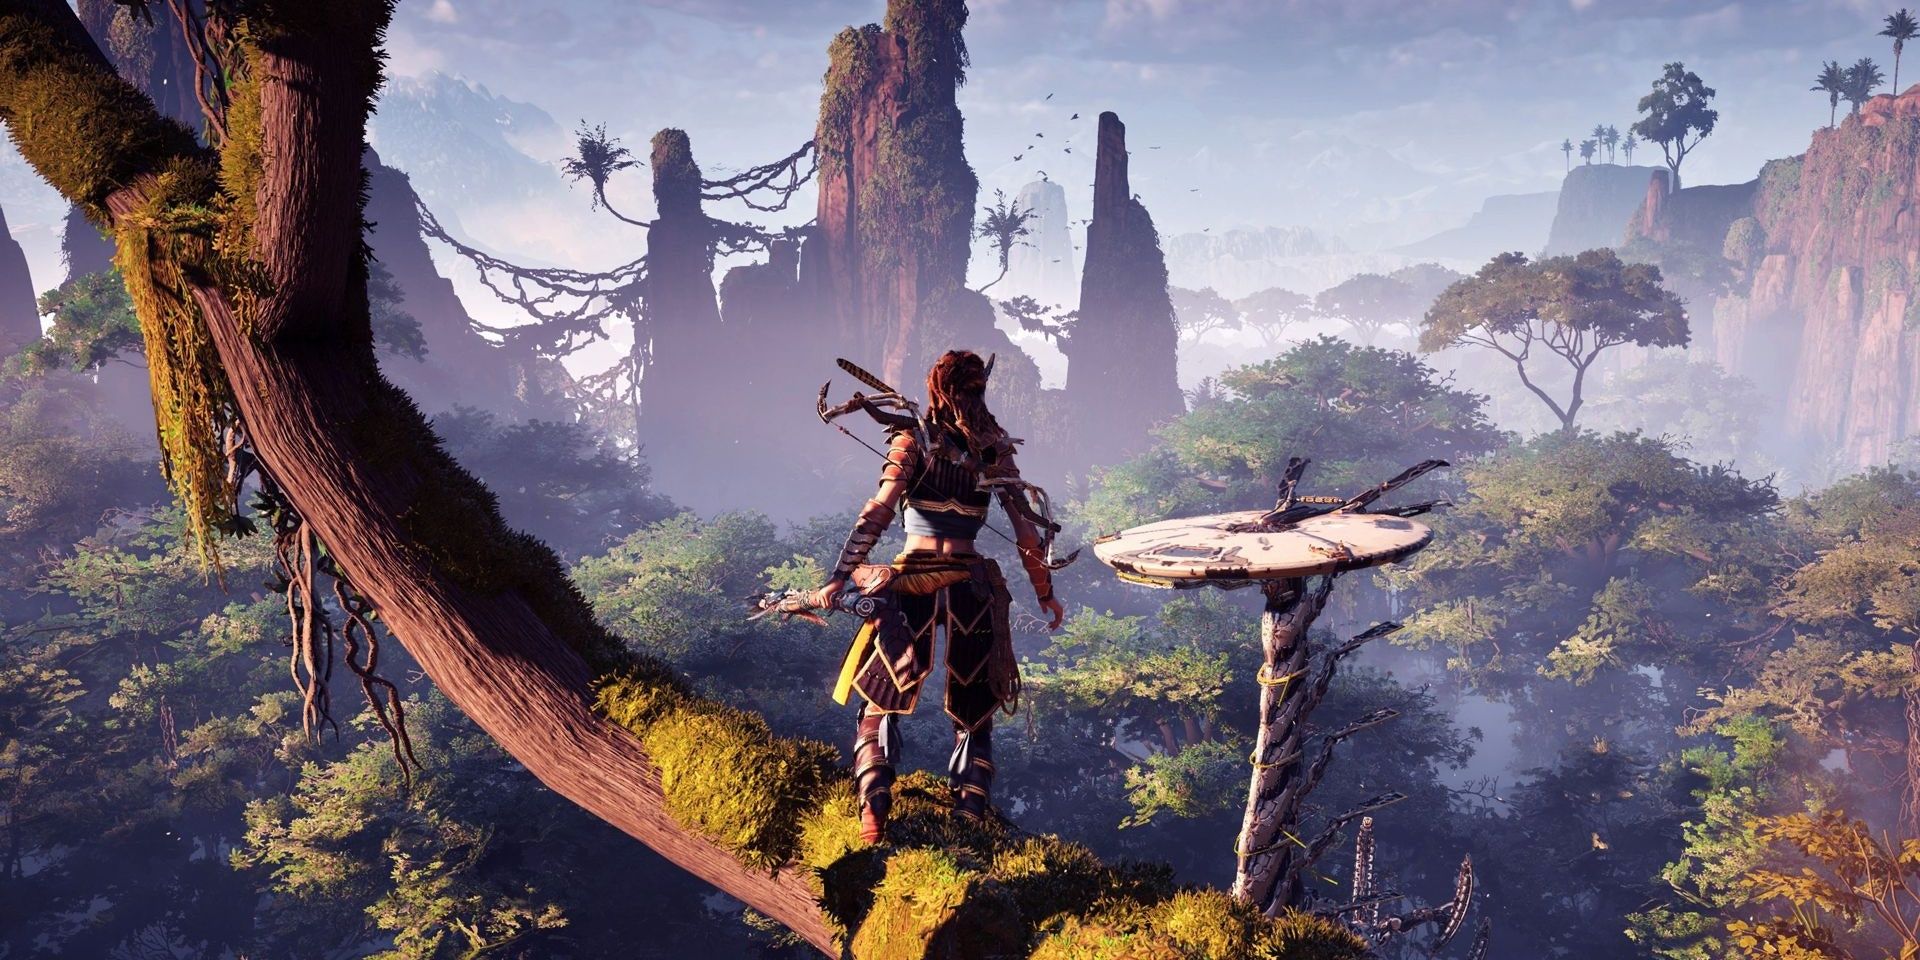 Aloy standing on a tree branch overlooking the forest in Horizon Zero Dawn